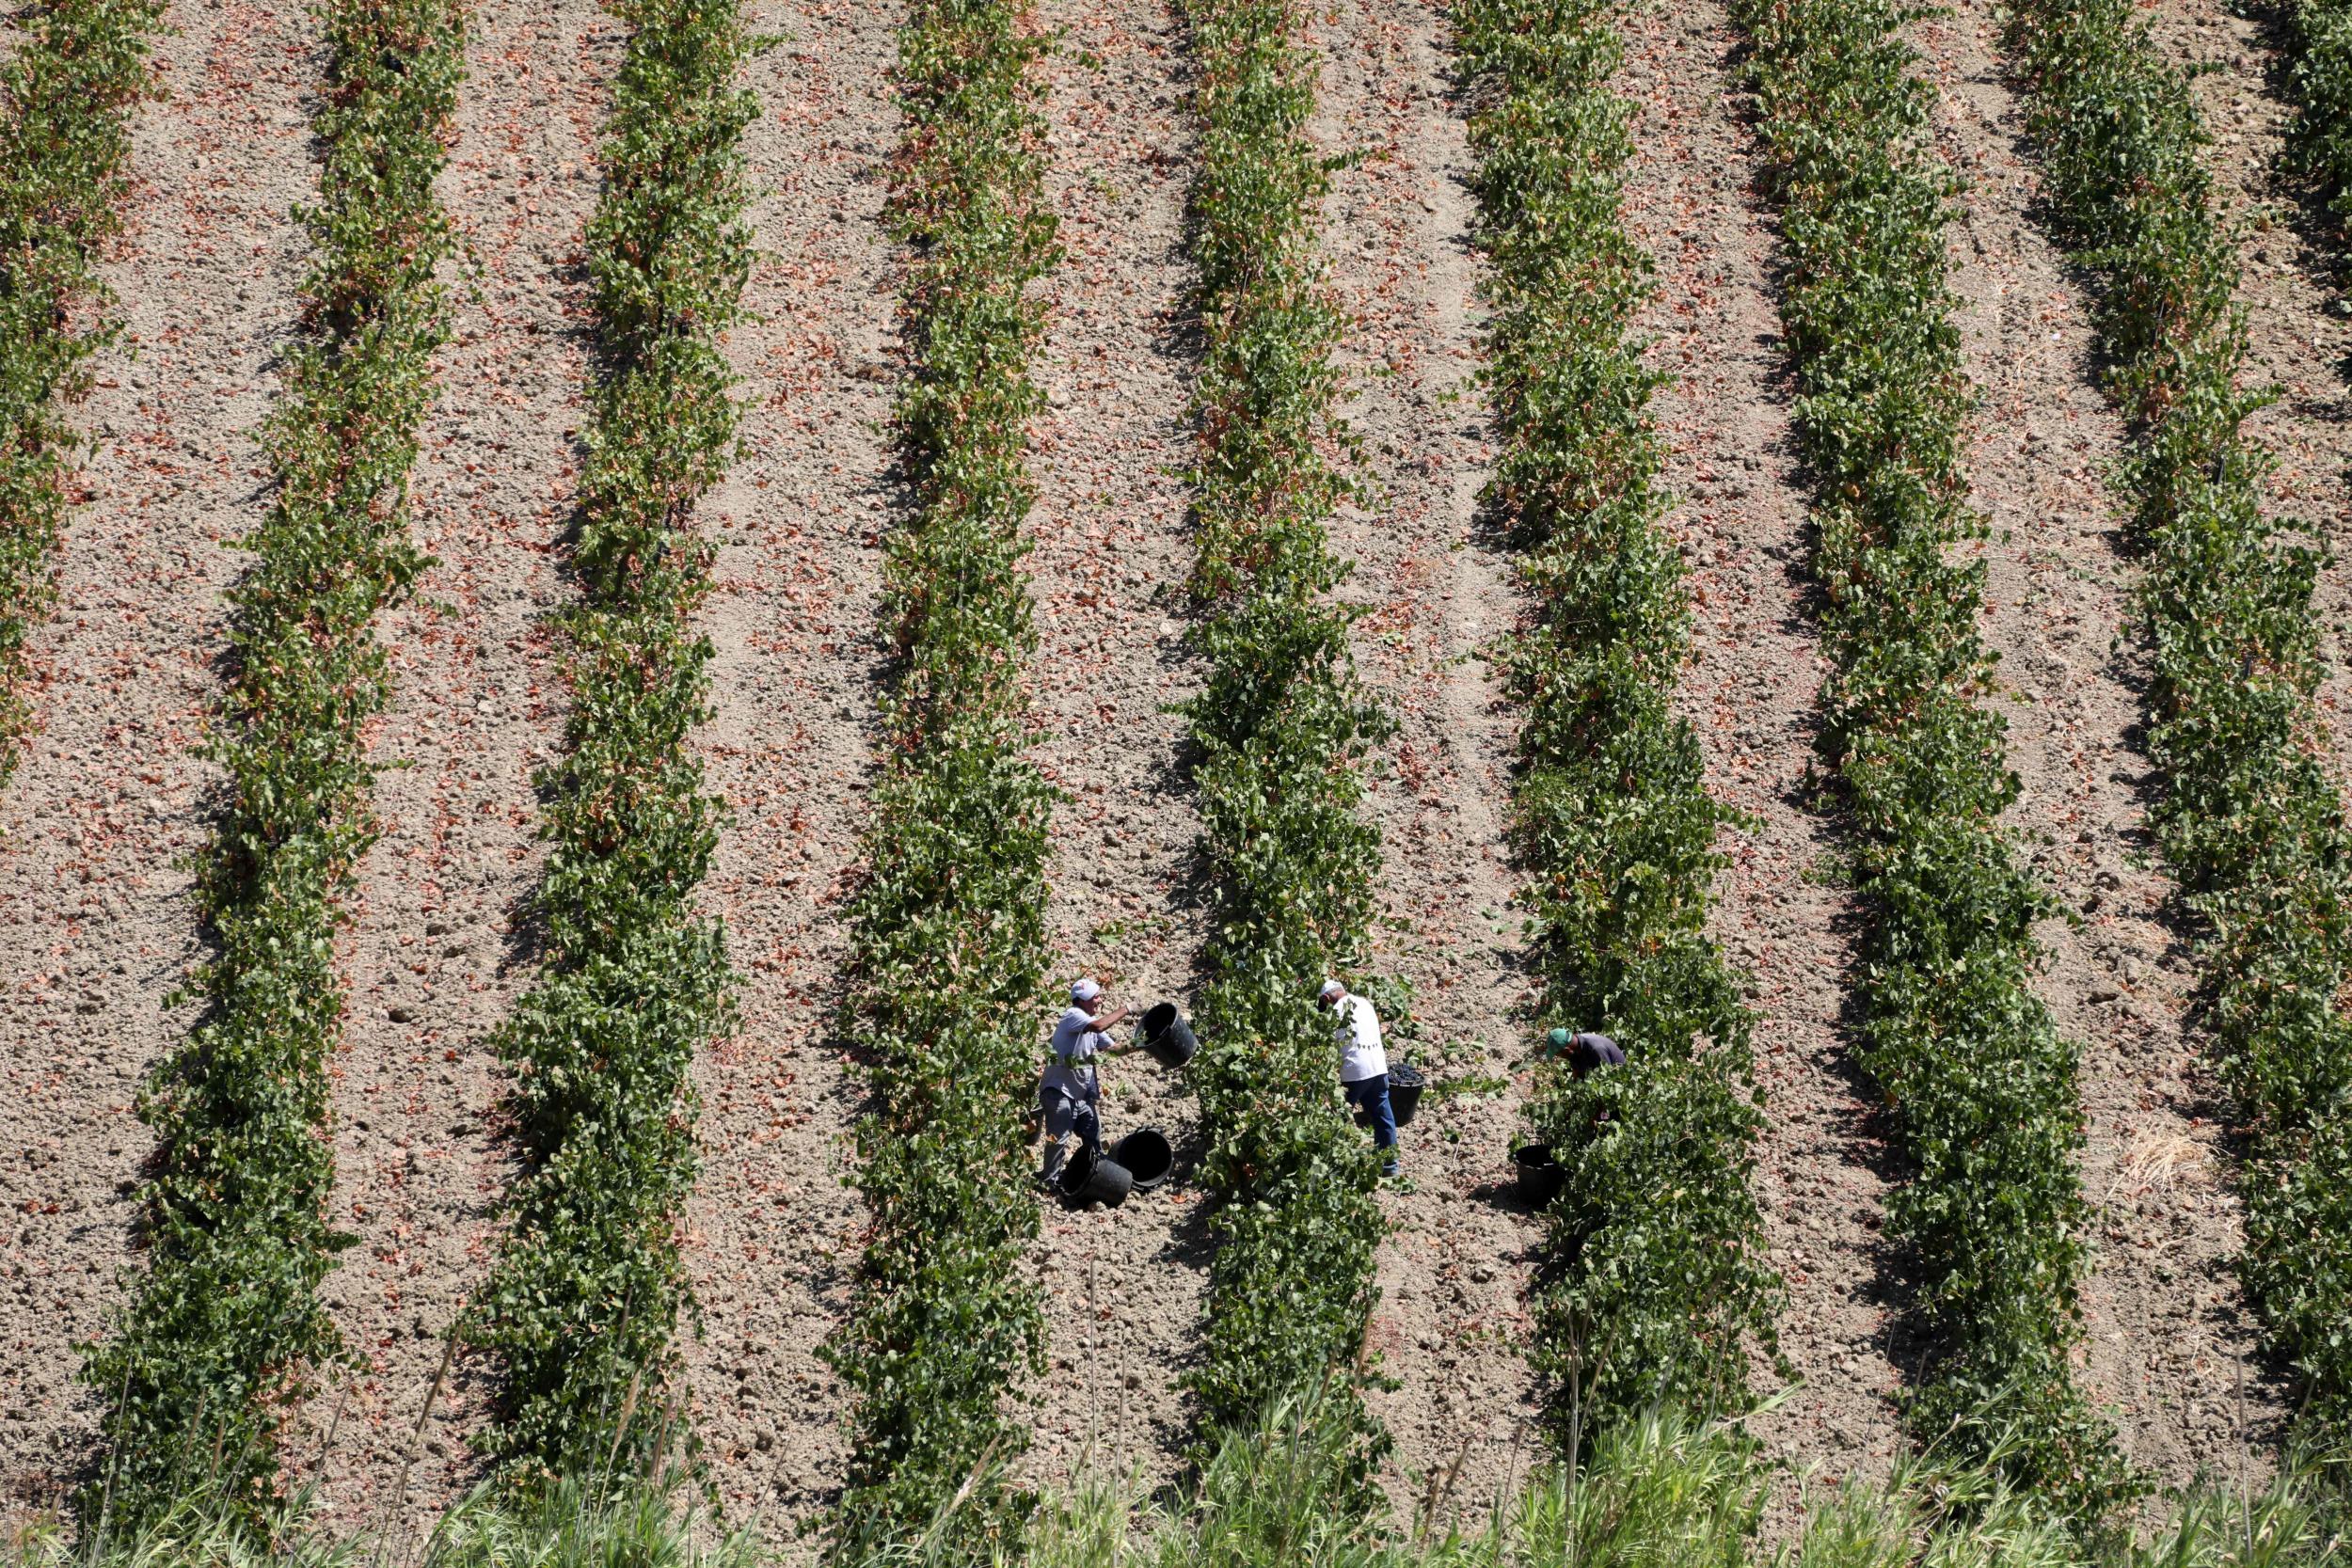 Farm labourers work in a vineyard on the island of Sicily